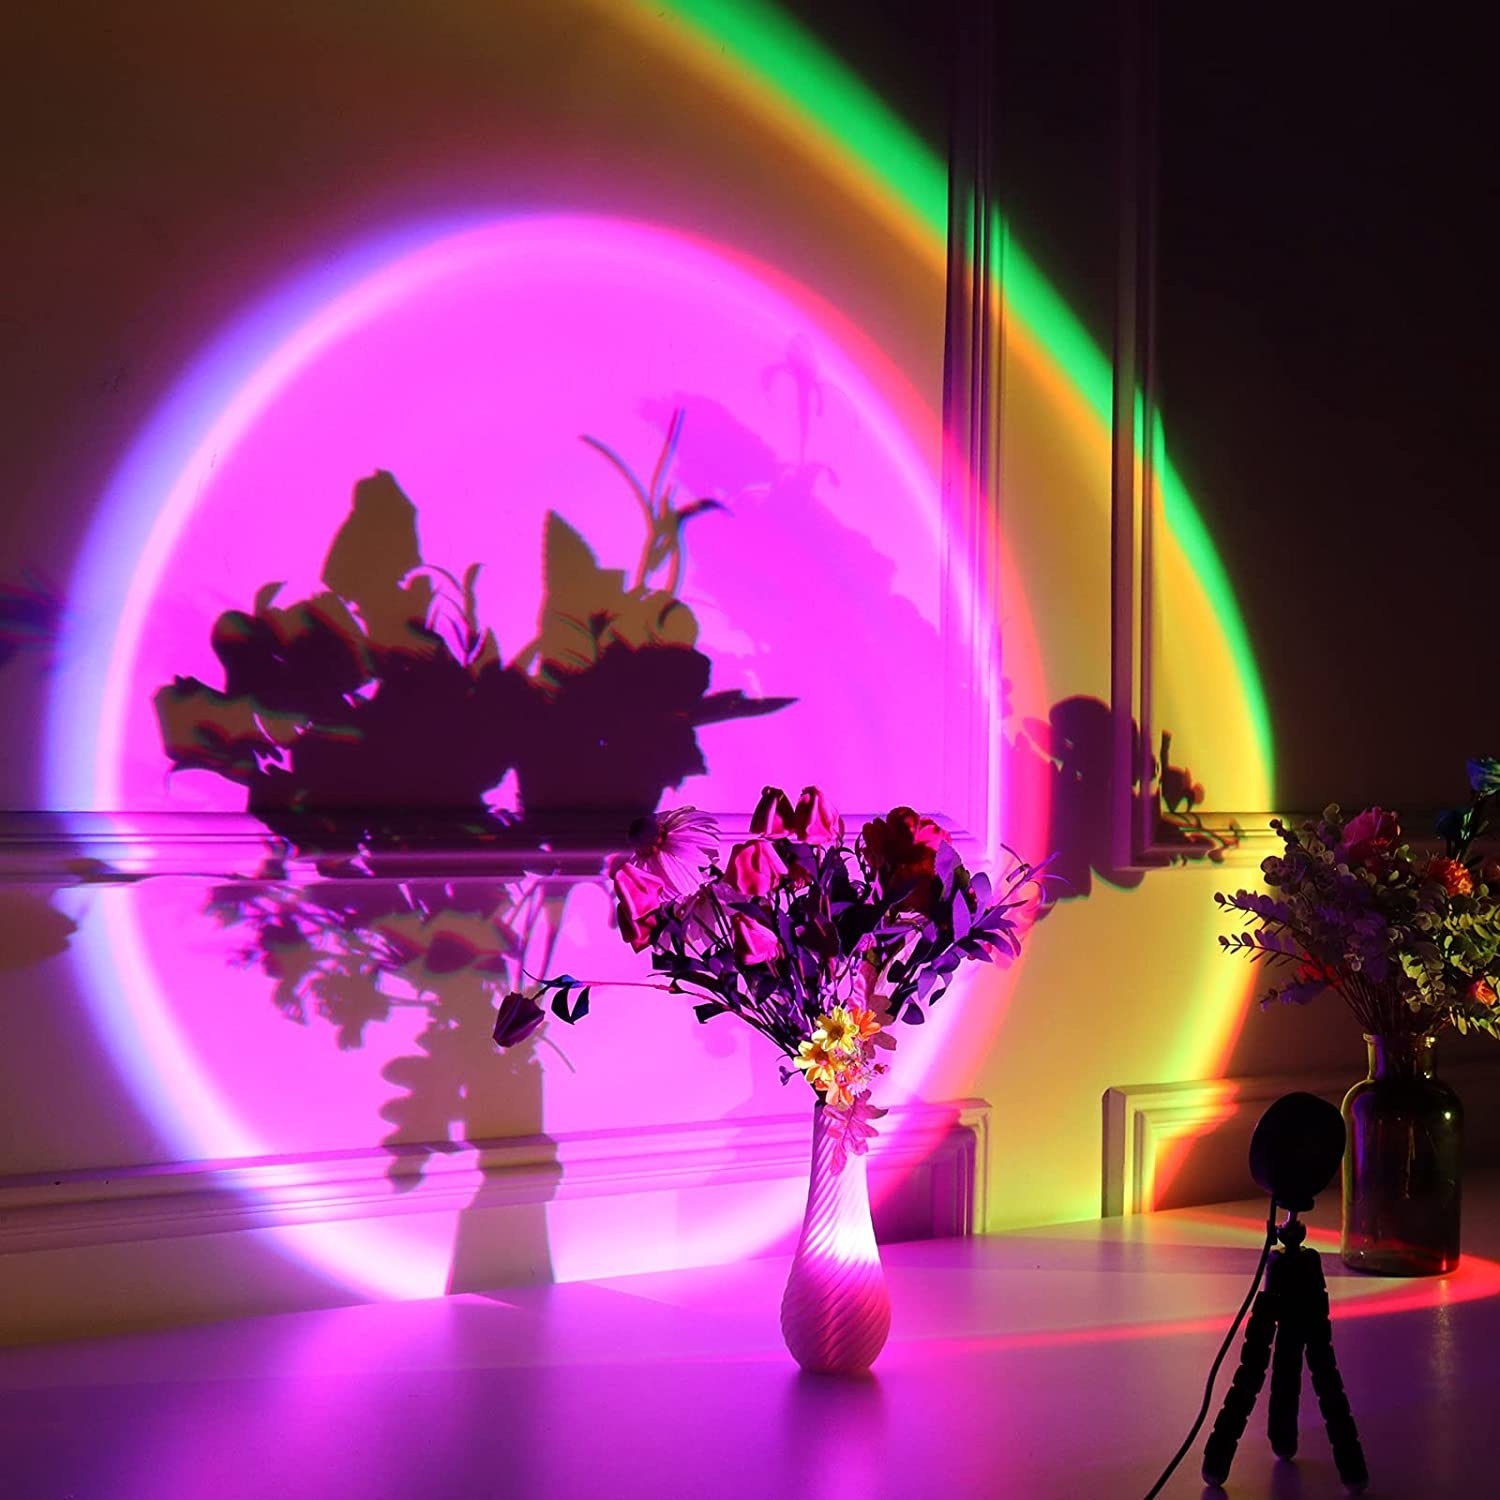 a sunset light projector projecting colourful lights onto a wall